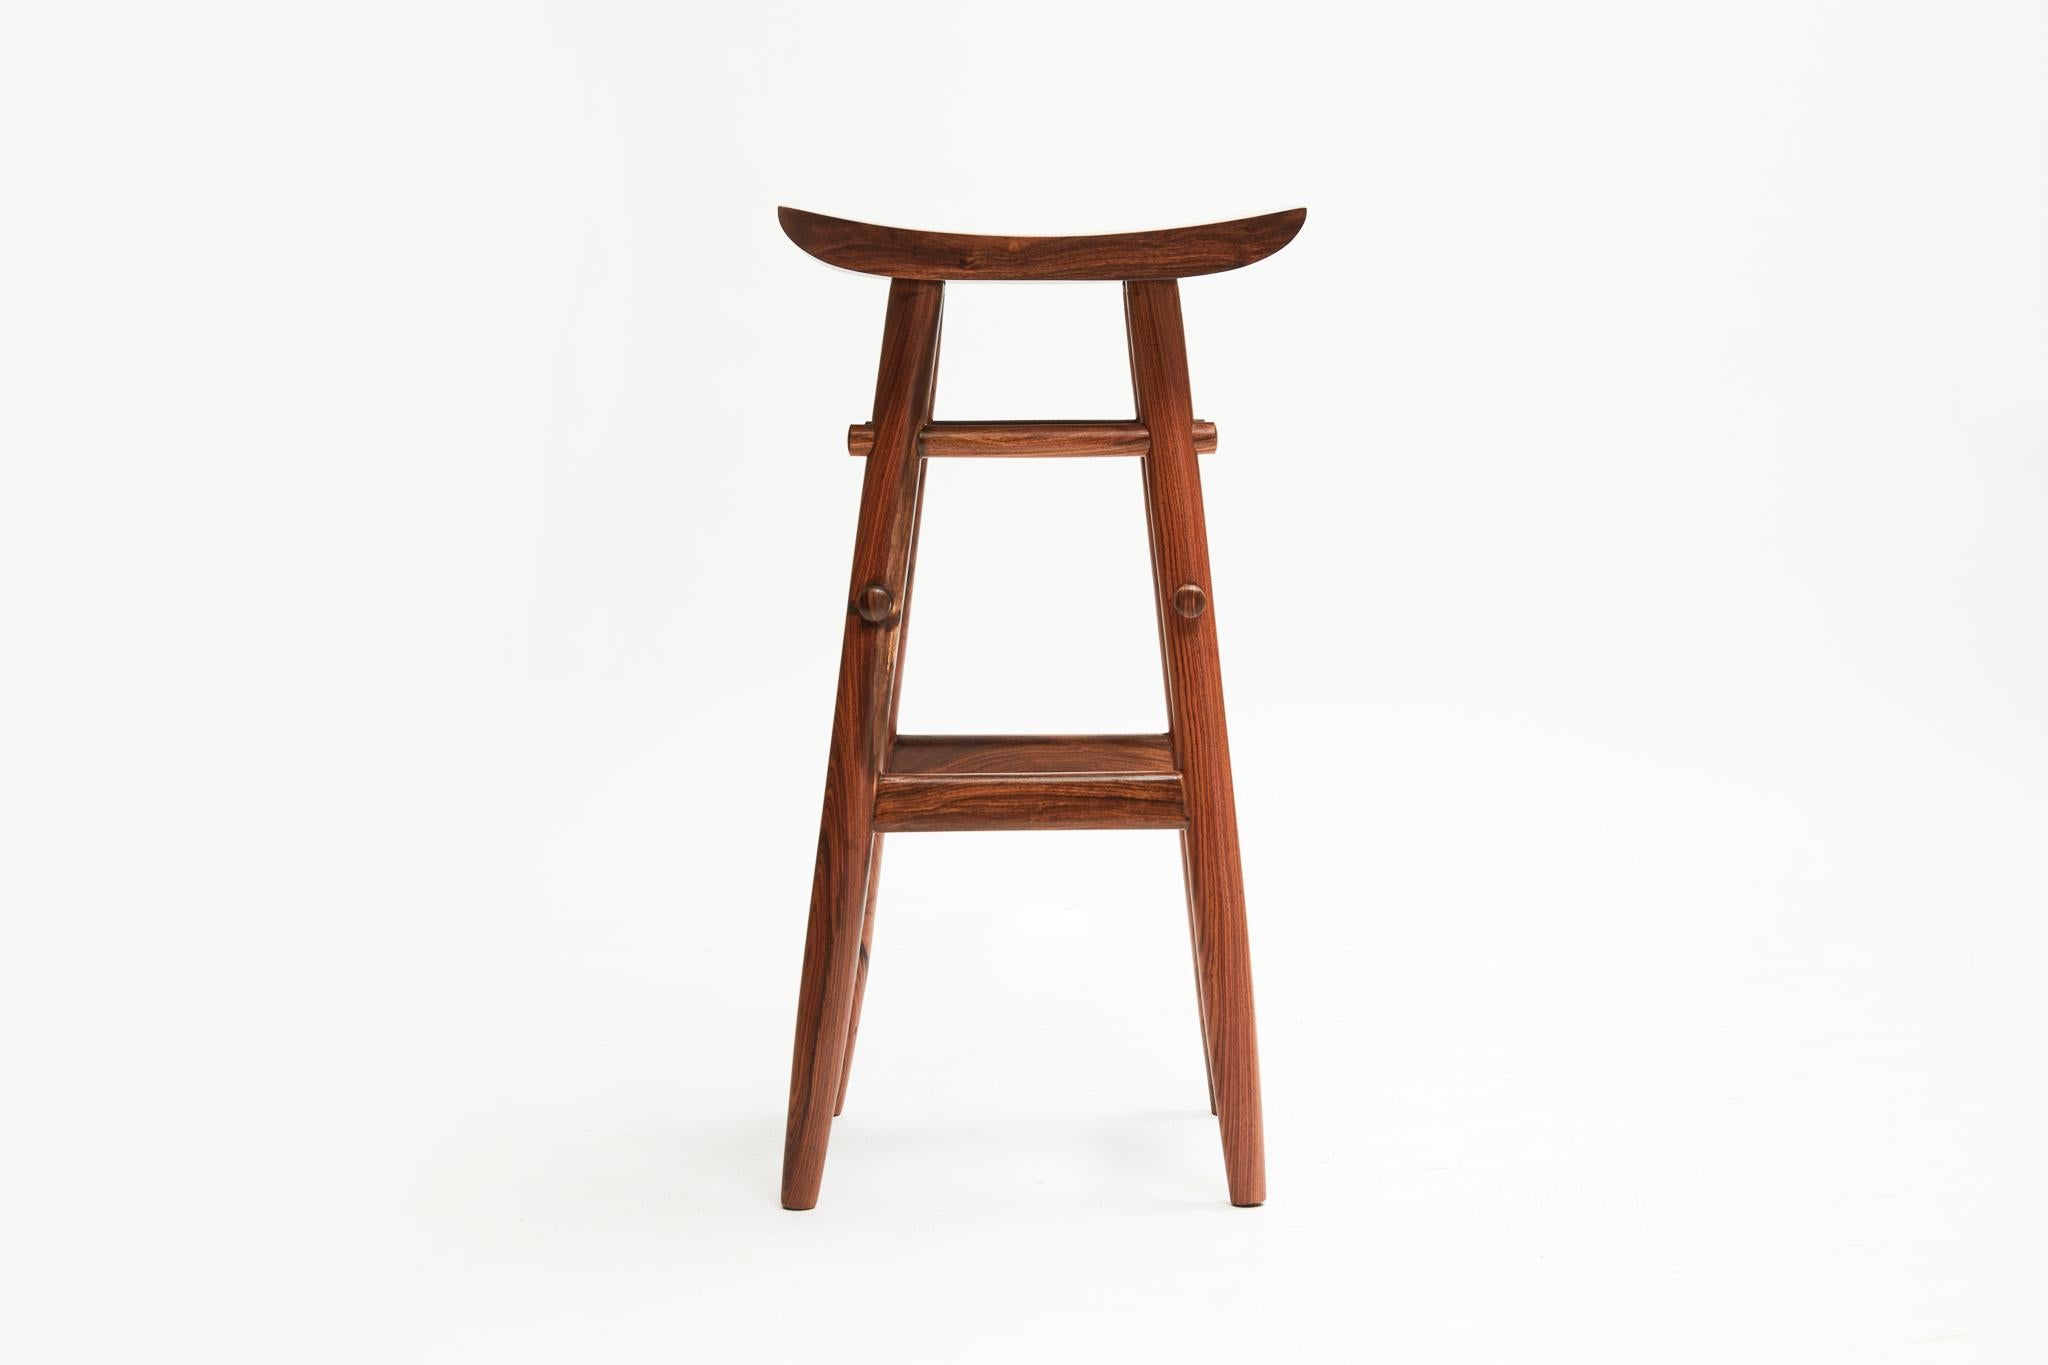 Available now, this very rare Mid-Century Modern stool model “Nine” and designed by Sergio Rodrigues in 2000 is absolutely gorgeous!

Top in solid hardwood composed of glued “lyptus” rulers with a sealer and varnish finish, turned and obscured